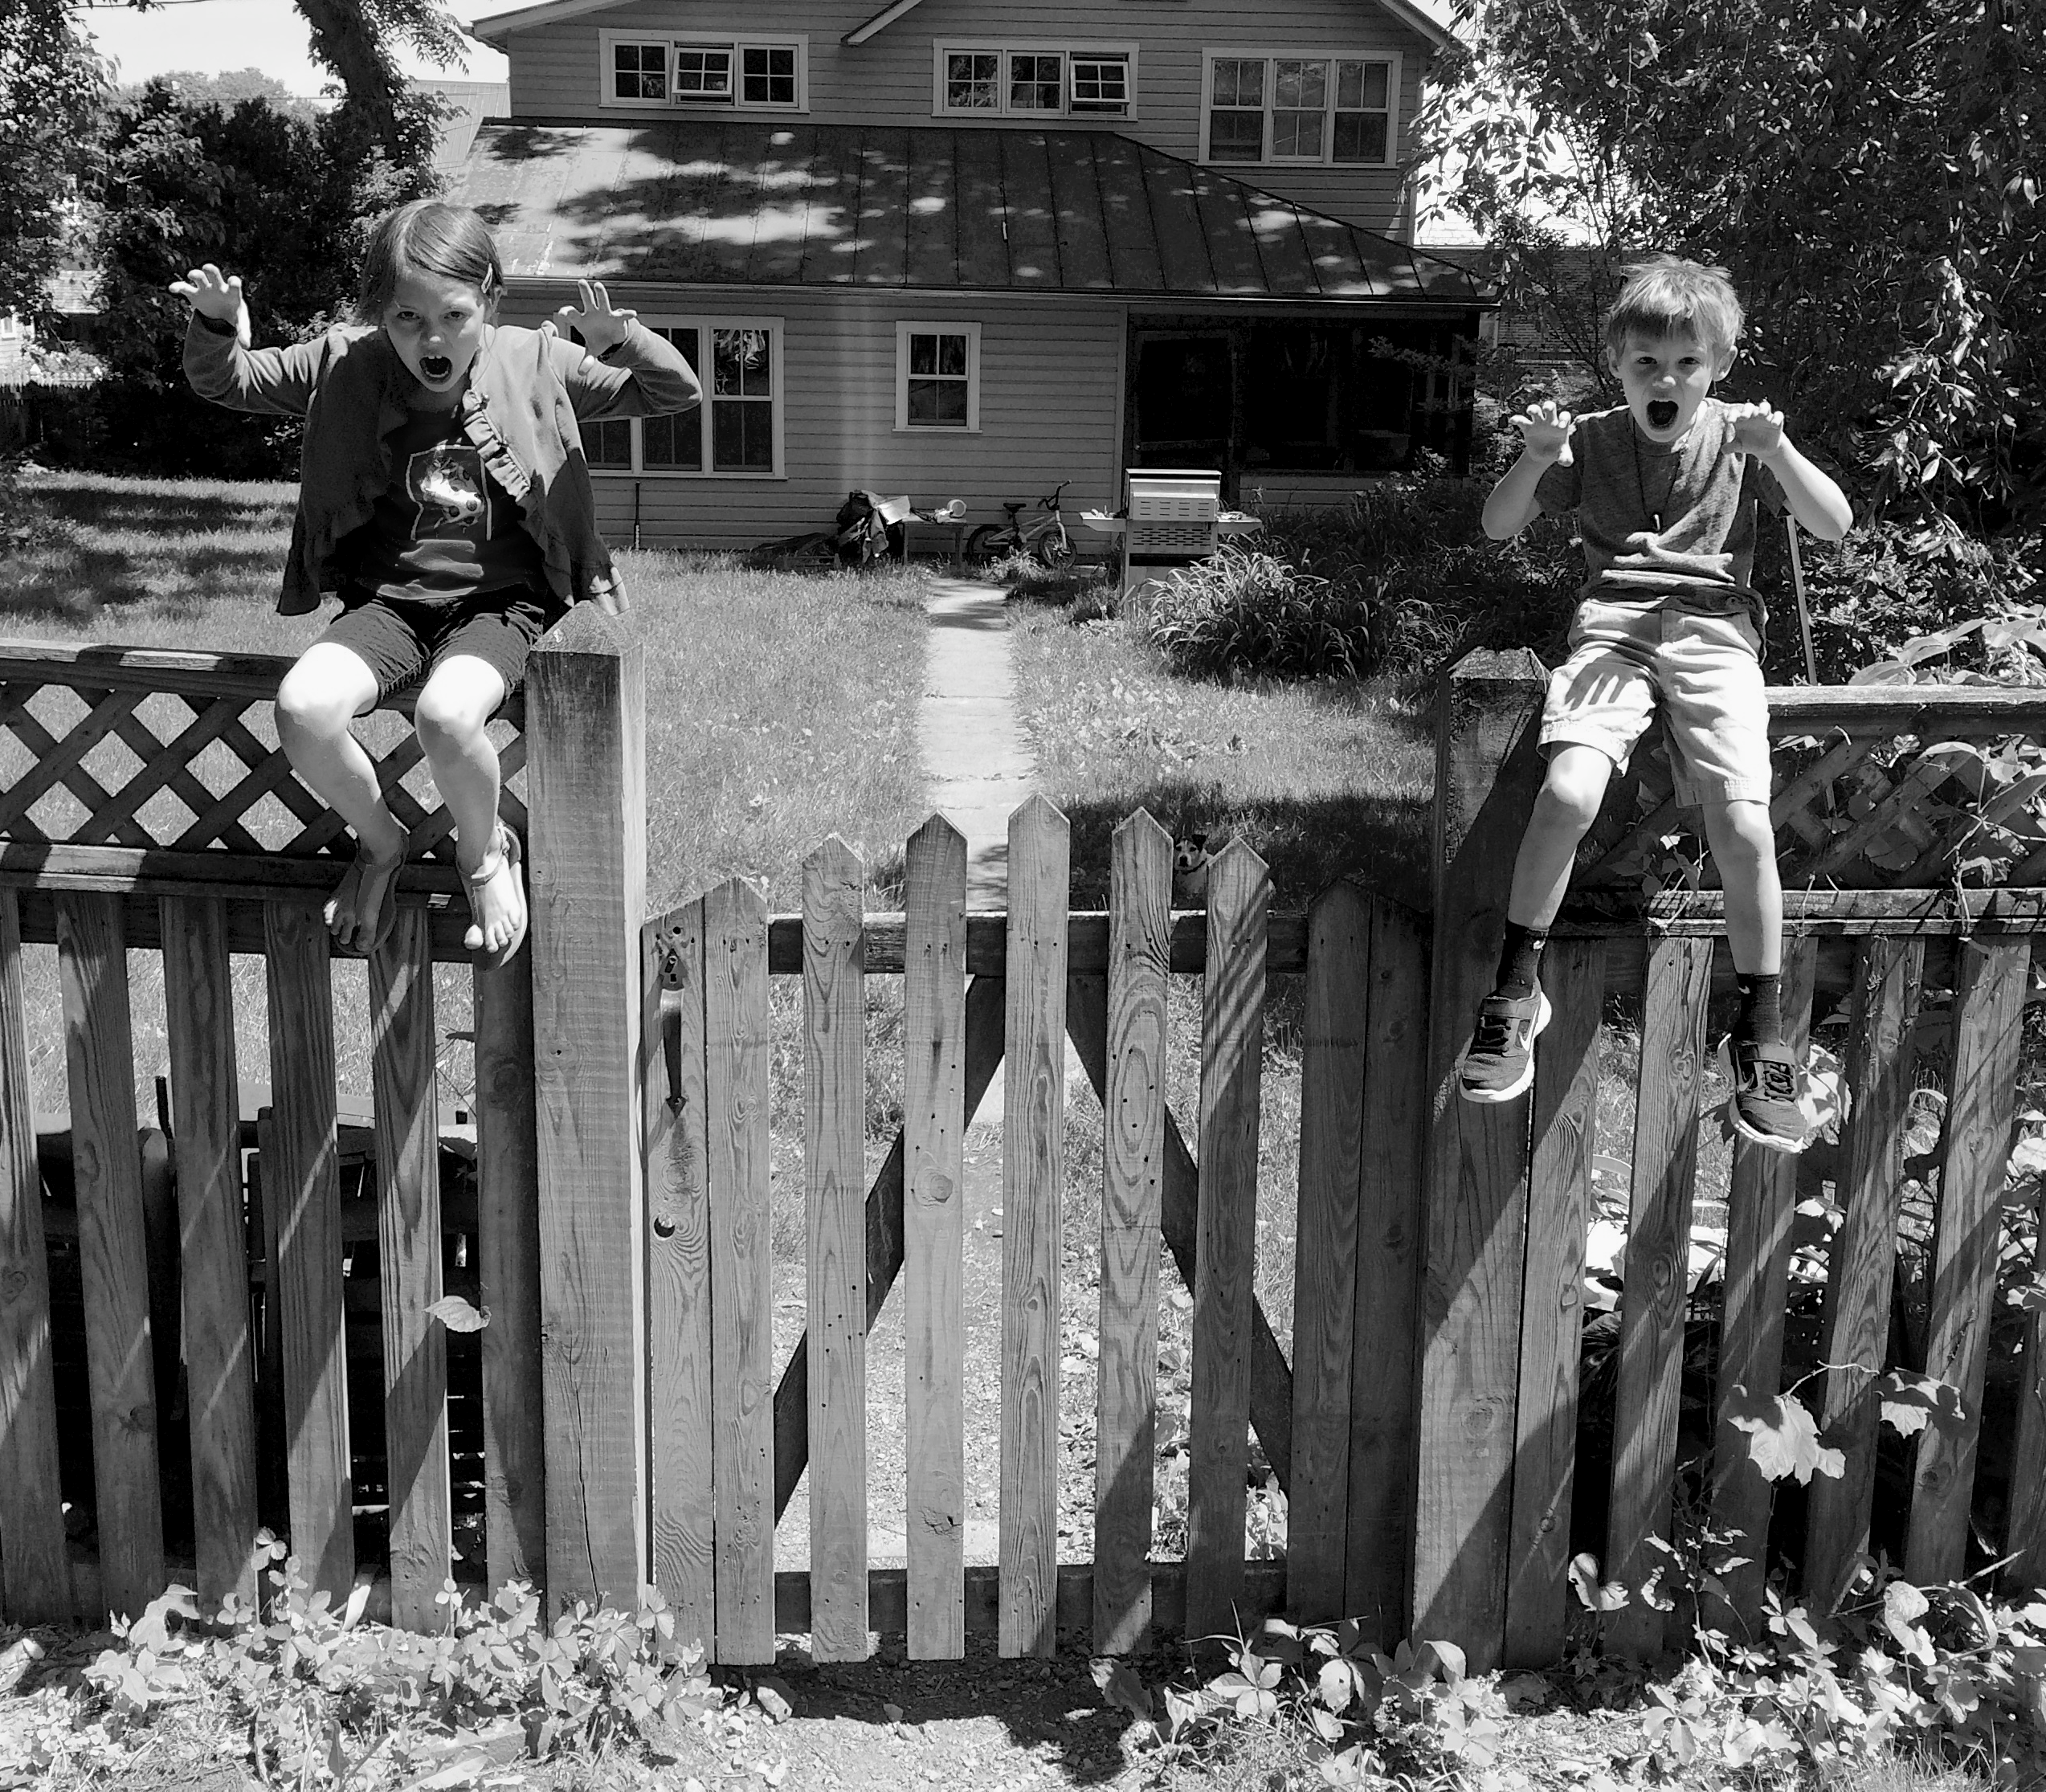 ‘Macaulay and Em as gargoyles. Two children sit on a wooden fence in a backyard, posing like gargoyles with playful expressions and raised hands mimicking claws. The background features a house with multiple windows and a metal roof, along with a grassy path and scattered bicycles. The image is in black and white.’